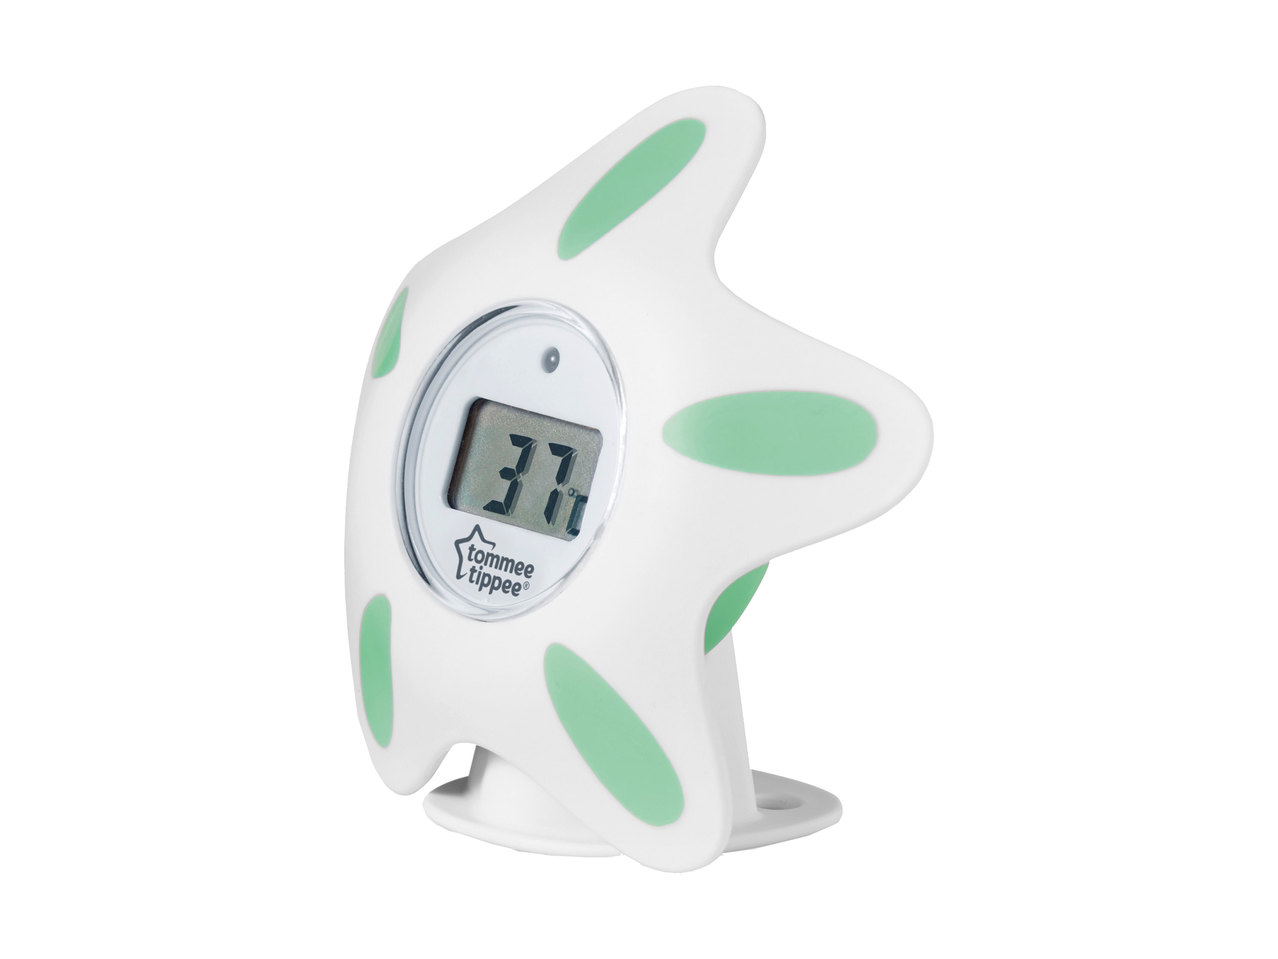 Tommee Tippee Digital Bath and Room Thermometer1